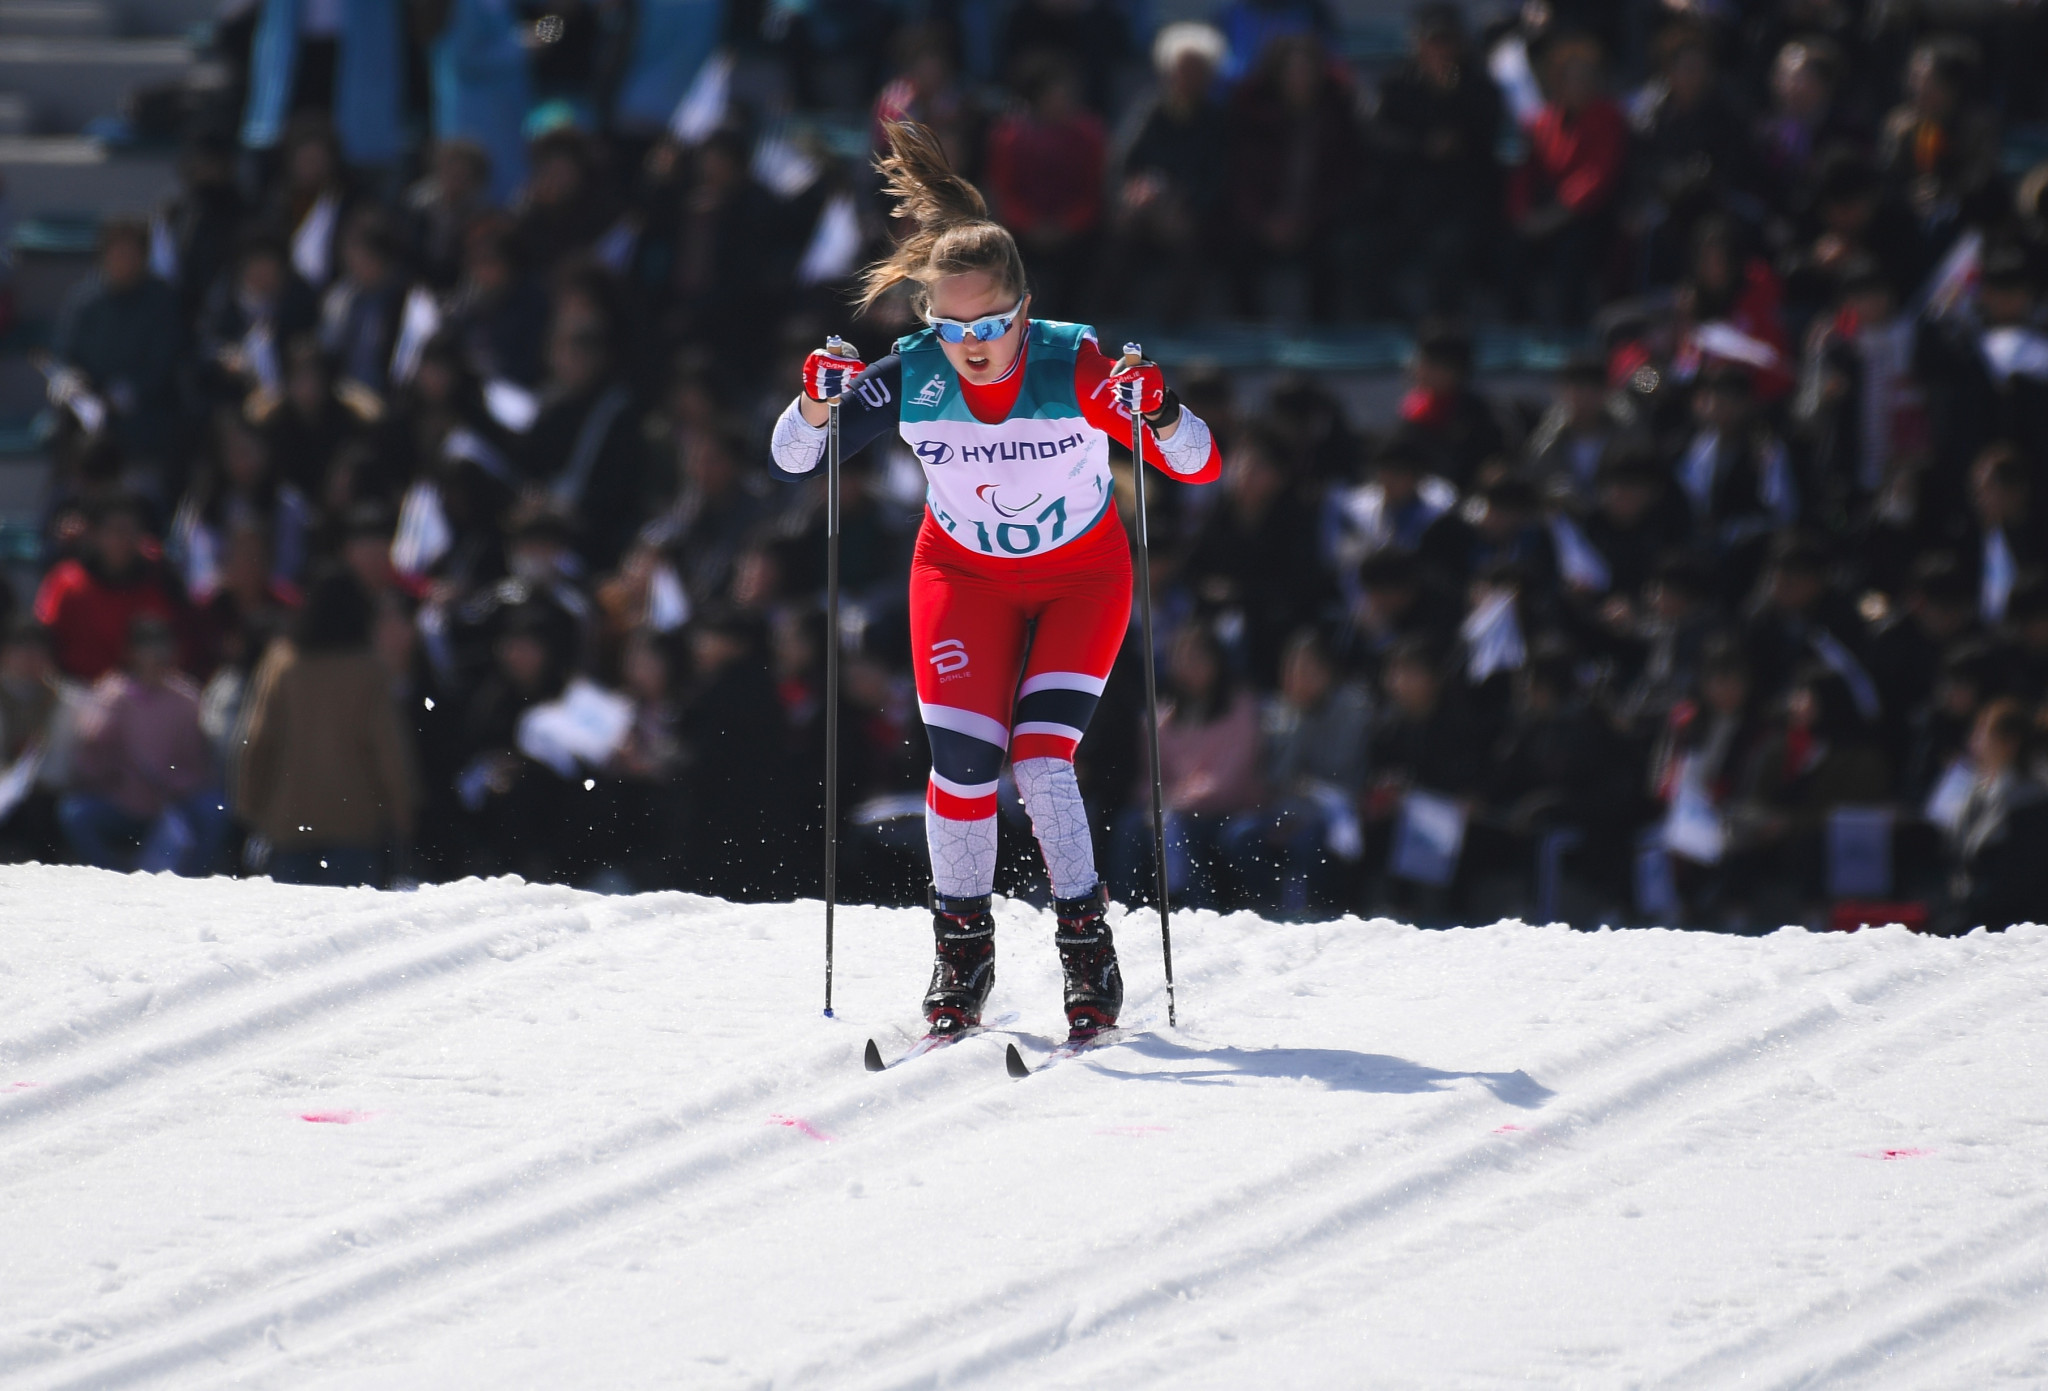 Norway's Vilde Nilsen, winner of a surprise Paralympic Games silver medal at Pyeongchang 2018, gained her first world title today with victory in the women’s standing race ©Getty Images